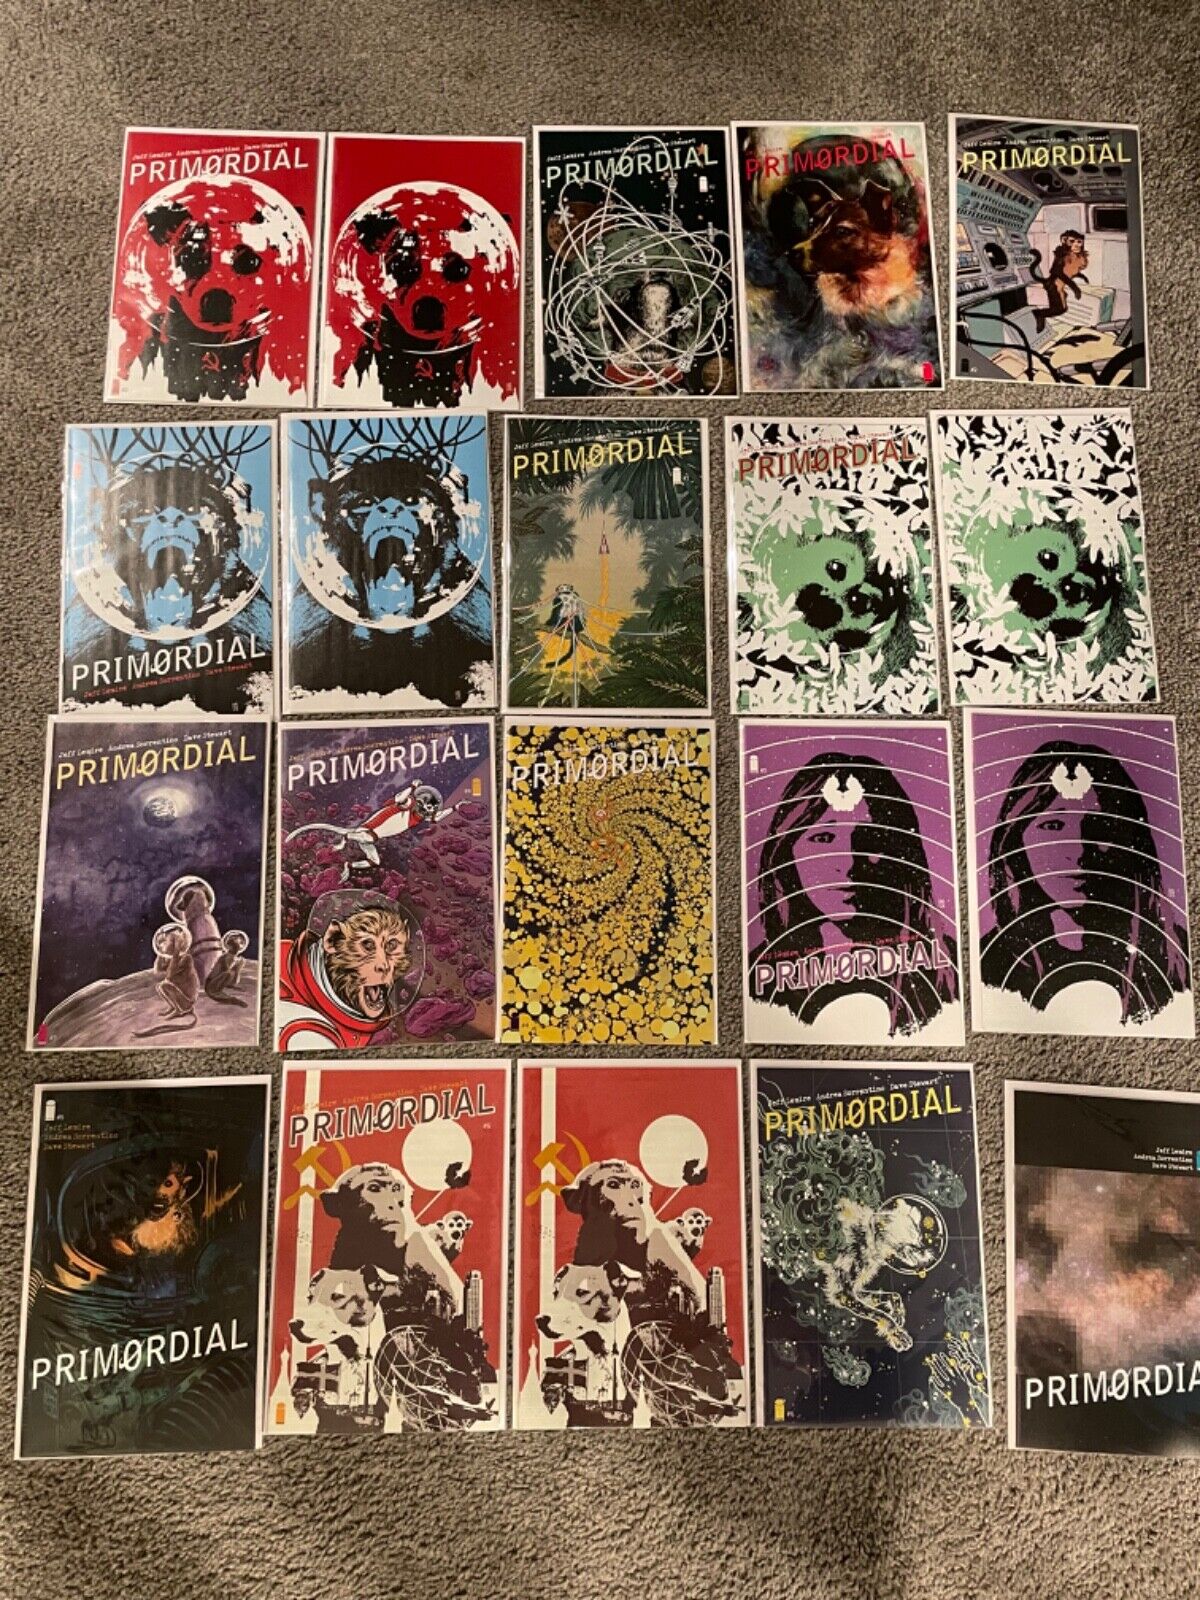 PRIMORDIAL - Collection of #2-6 with VARIANTS - 20 TOTAL Comics